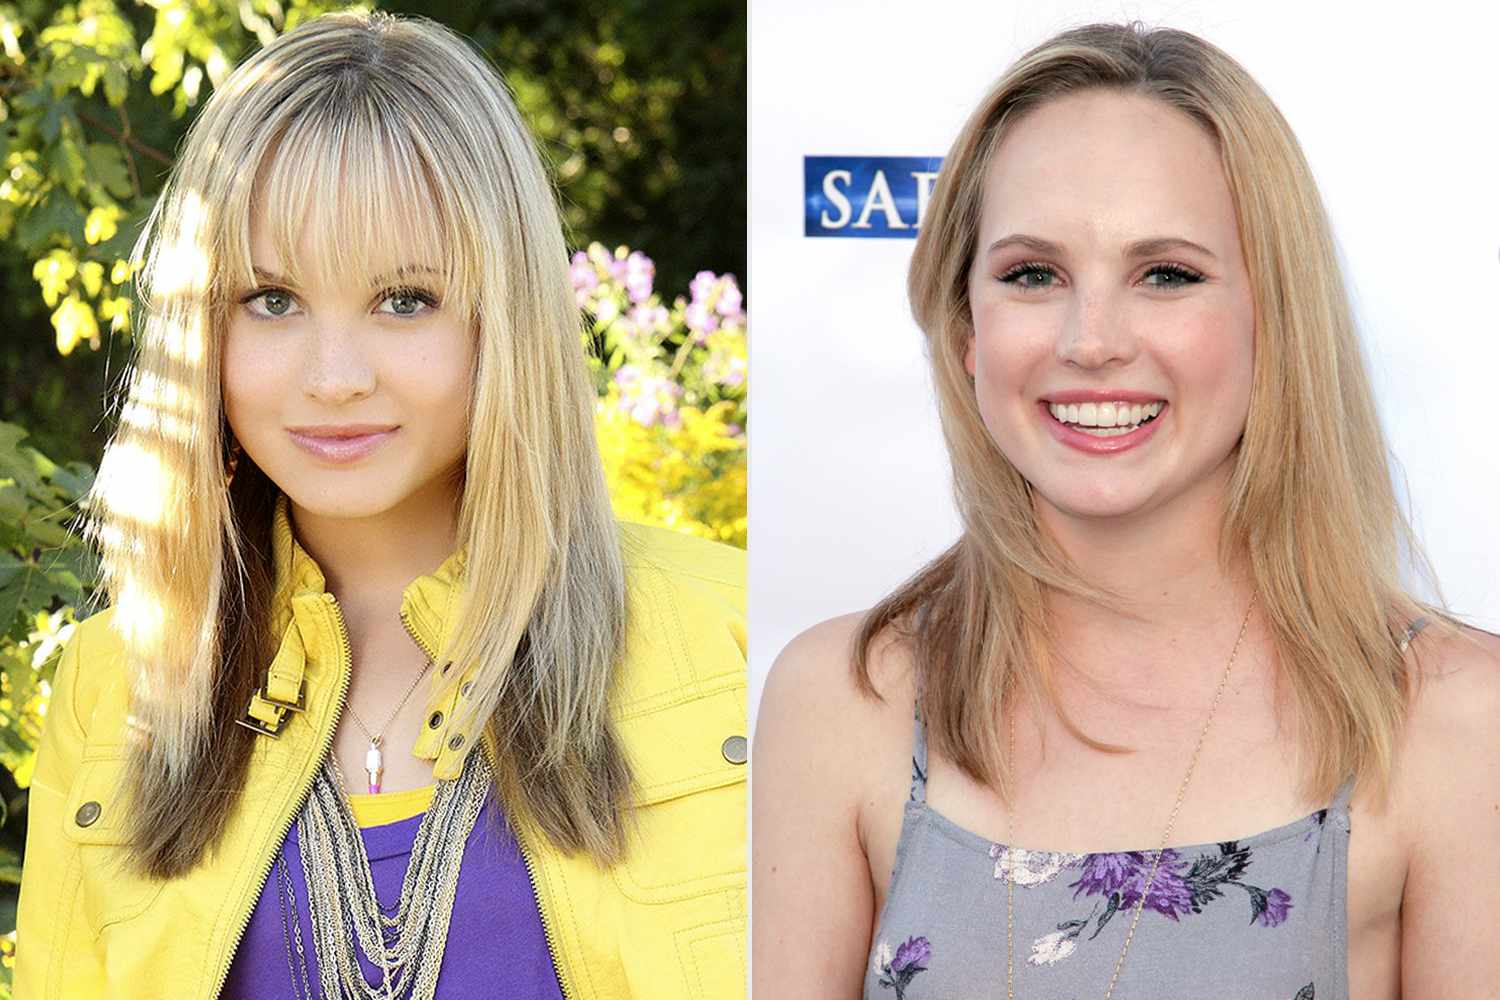 Meaghan Martin - Camp Rock, Where Are They Now